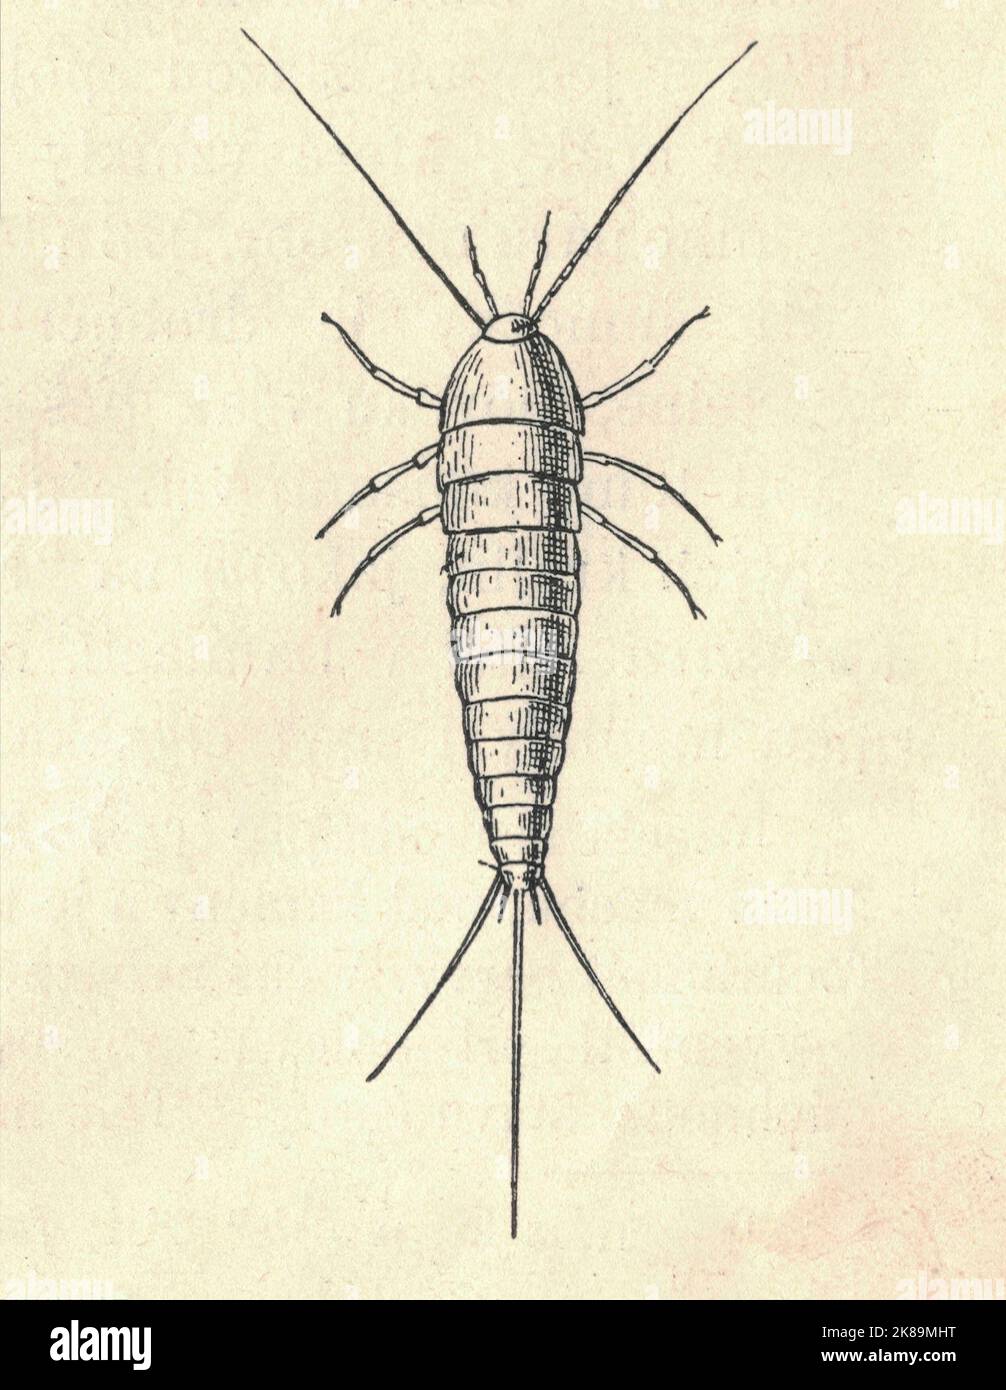 Antique engraved illustration of the silverfish. Vintage illustration of the silverfish. Old engraved picture of the silverfish. Picture of the silverfish. Book illustration published 1907. The silverfish (Lepisma saccharinum) is a species of small, primitive, wingless insect in the order Zygentoma (formerly Thysanura). Its common name derives from the insect's silvery light grey colour, combined with the fish-like appearance of its movements. The scientific name (L. saccharinum) indicates that the silverfish's diet consists of carbohydrates such as sugar or starches. While the common name sil Stock Photo